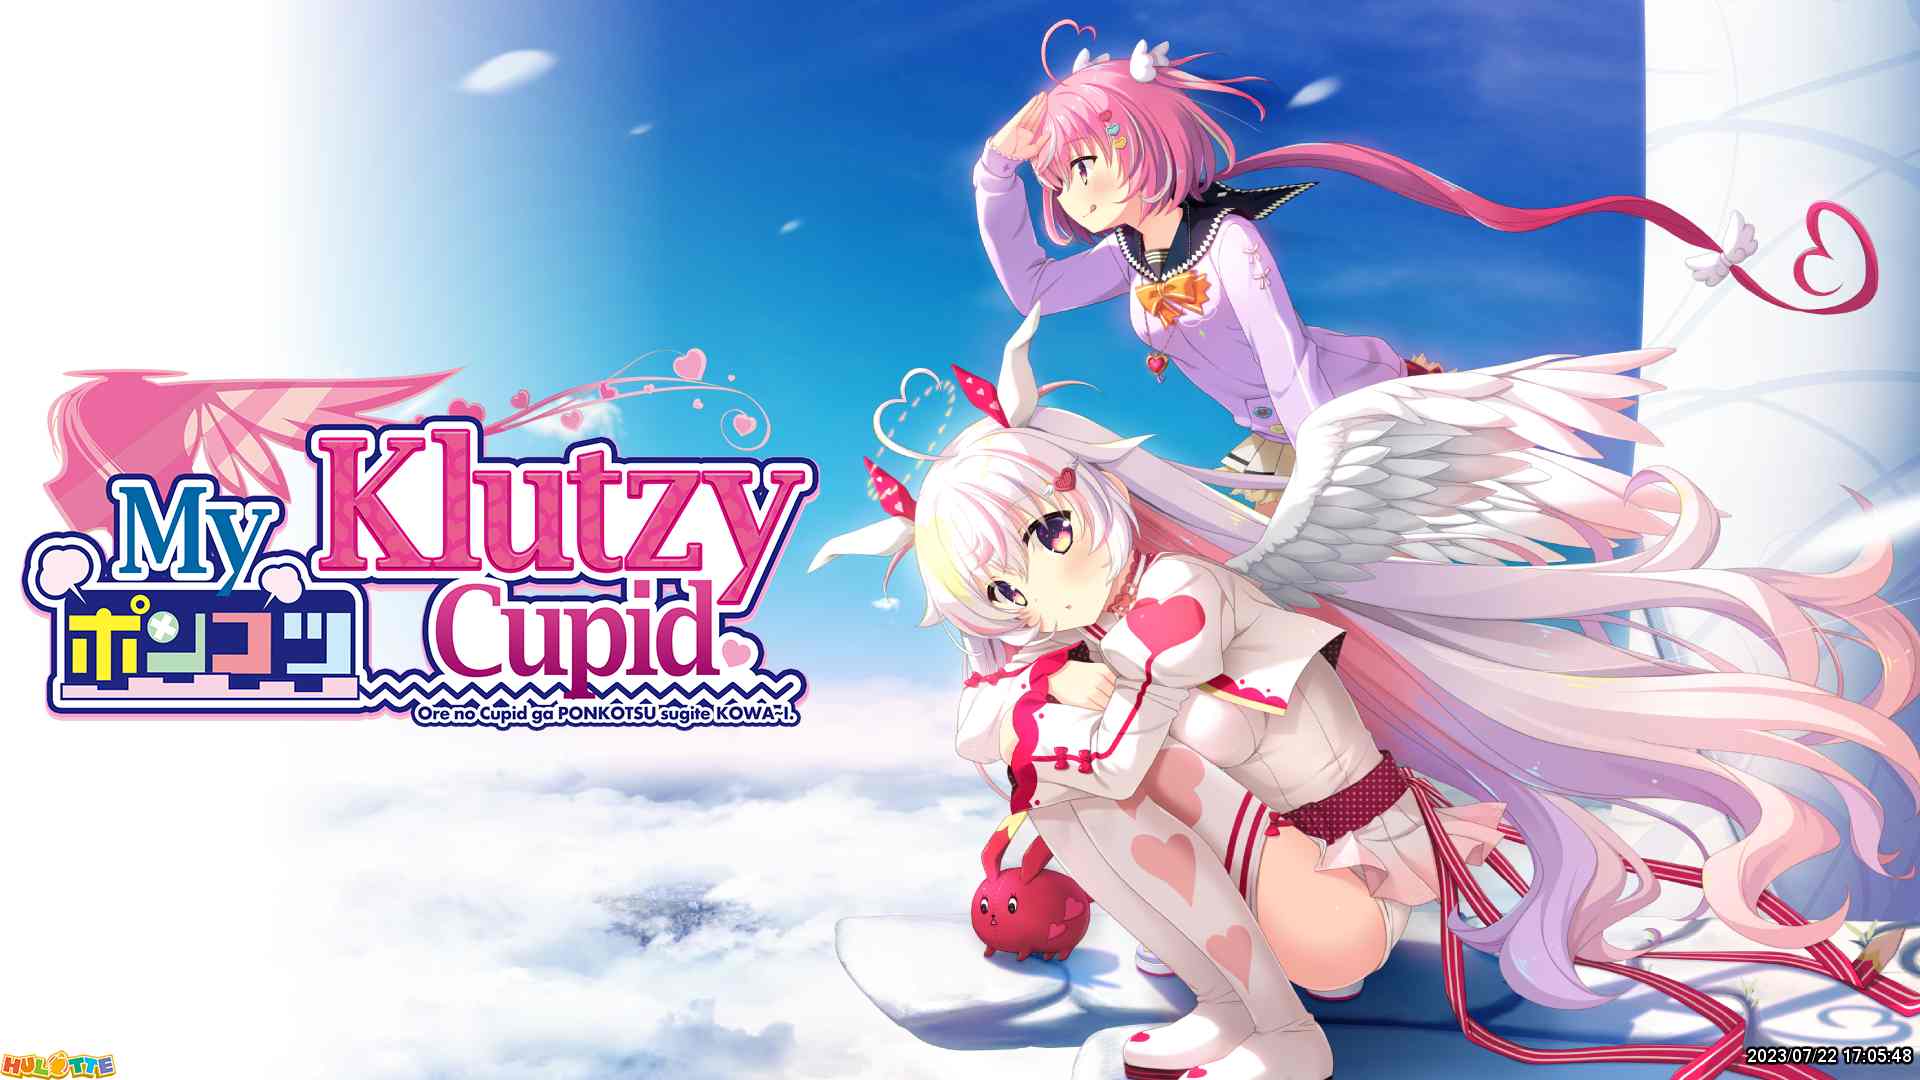 My Klutzy Cupid [Hulotte] Adult xxx Game Download